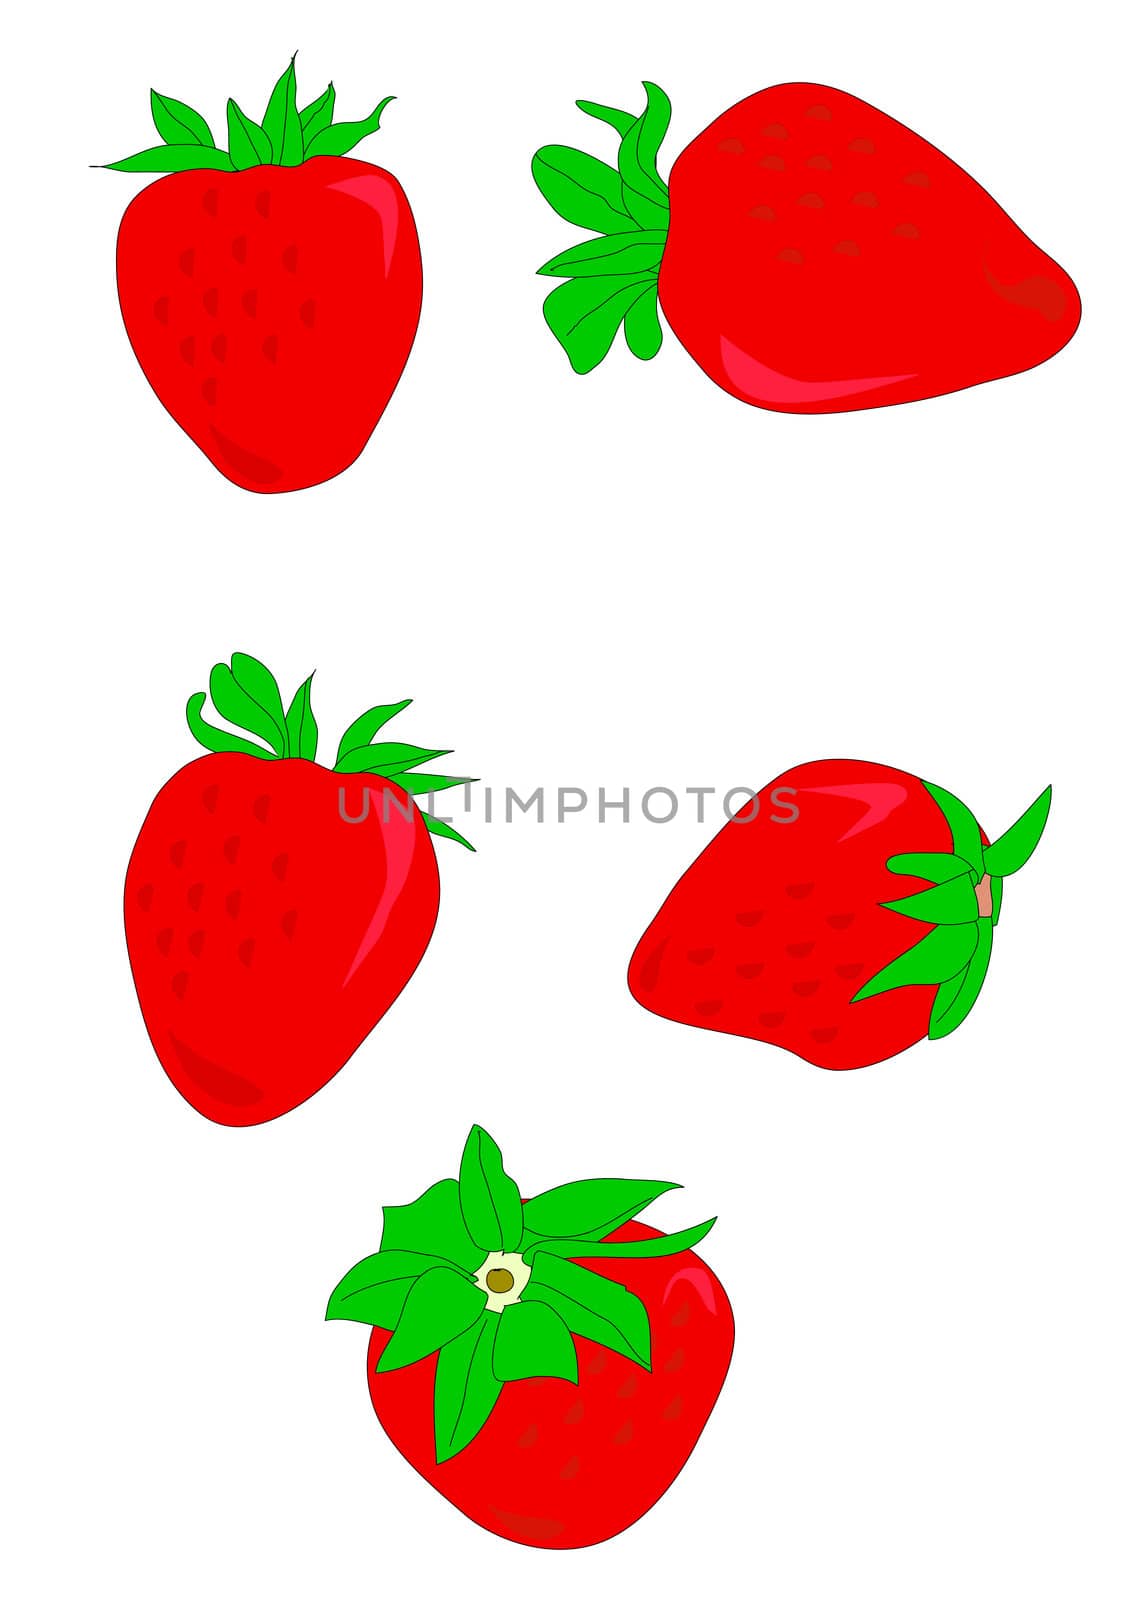 Illustration of red ripe strawberries with green tops.